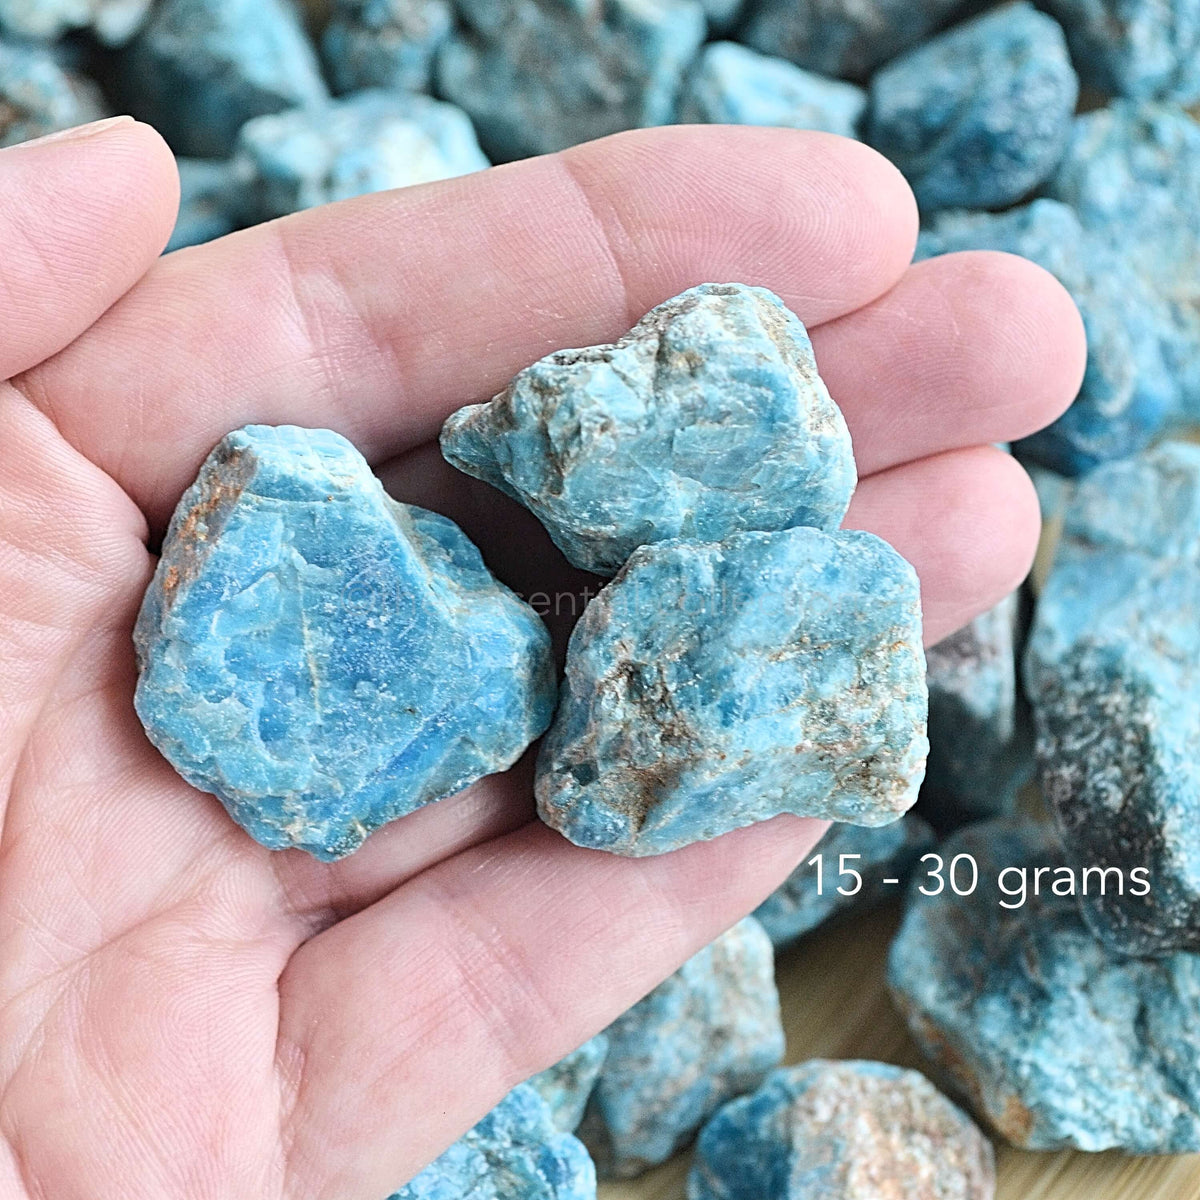 raw rough blue apatite in hand showing size